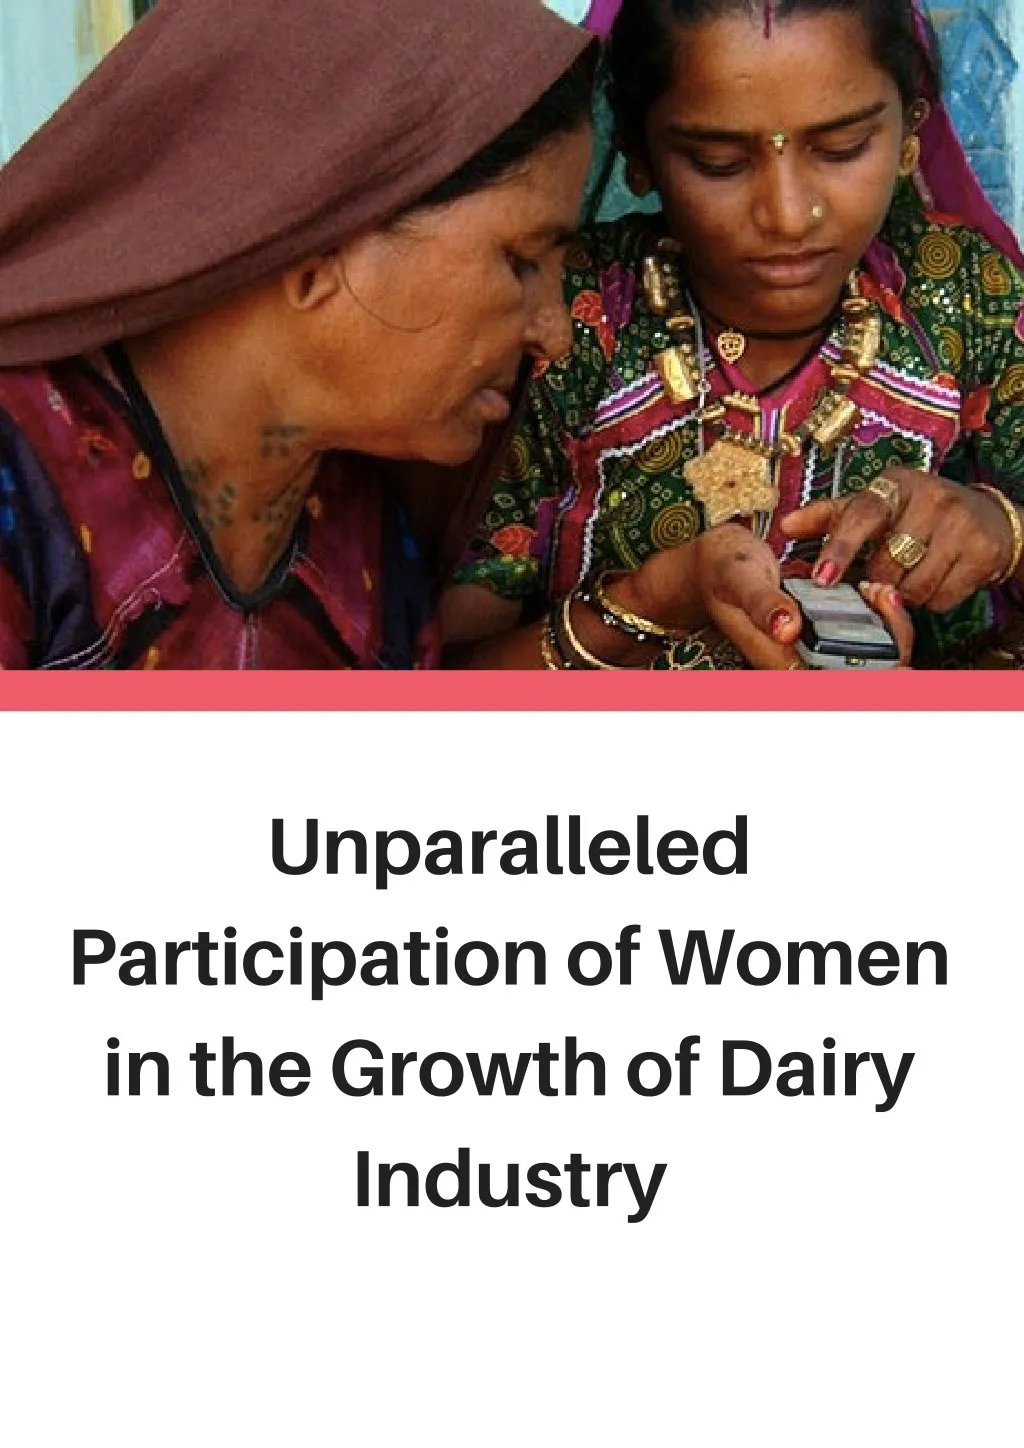 unparalleled participation of women in the growth